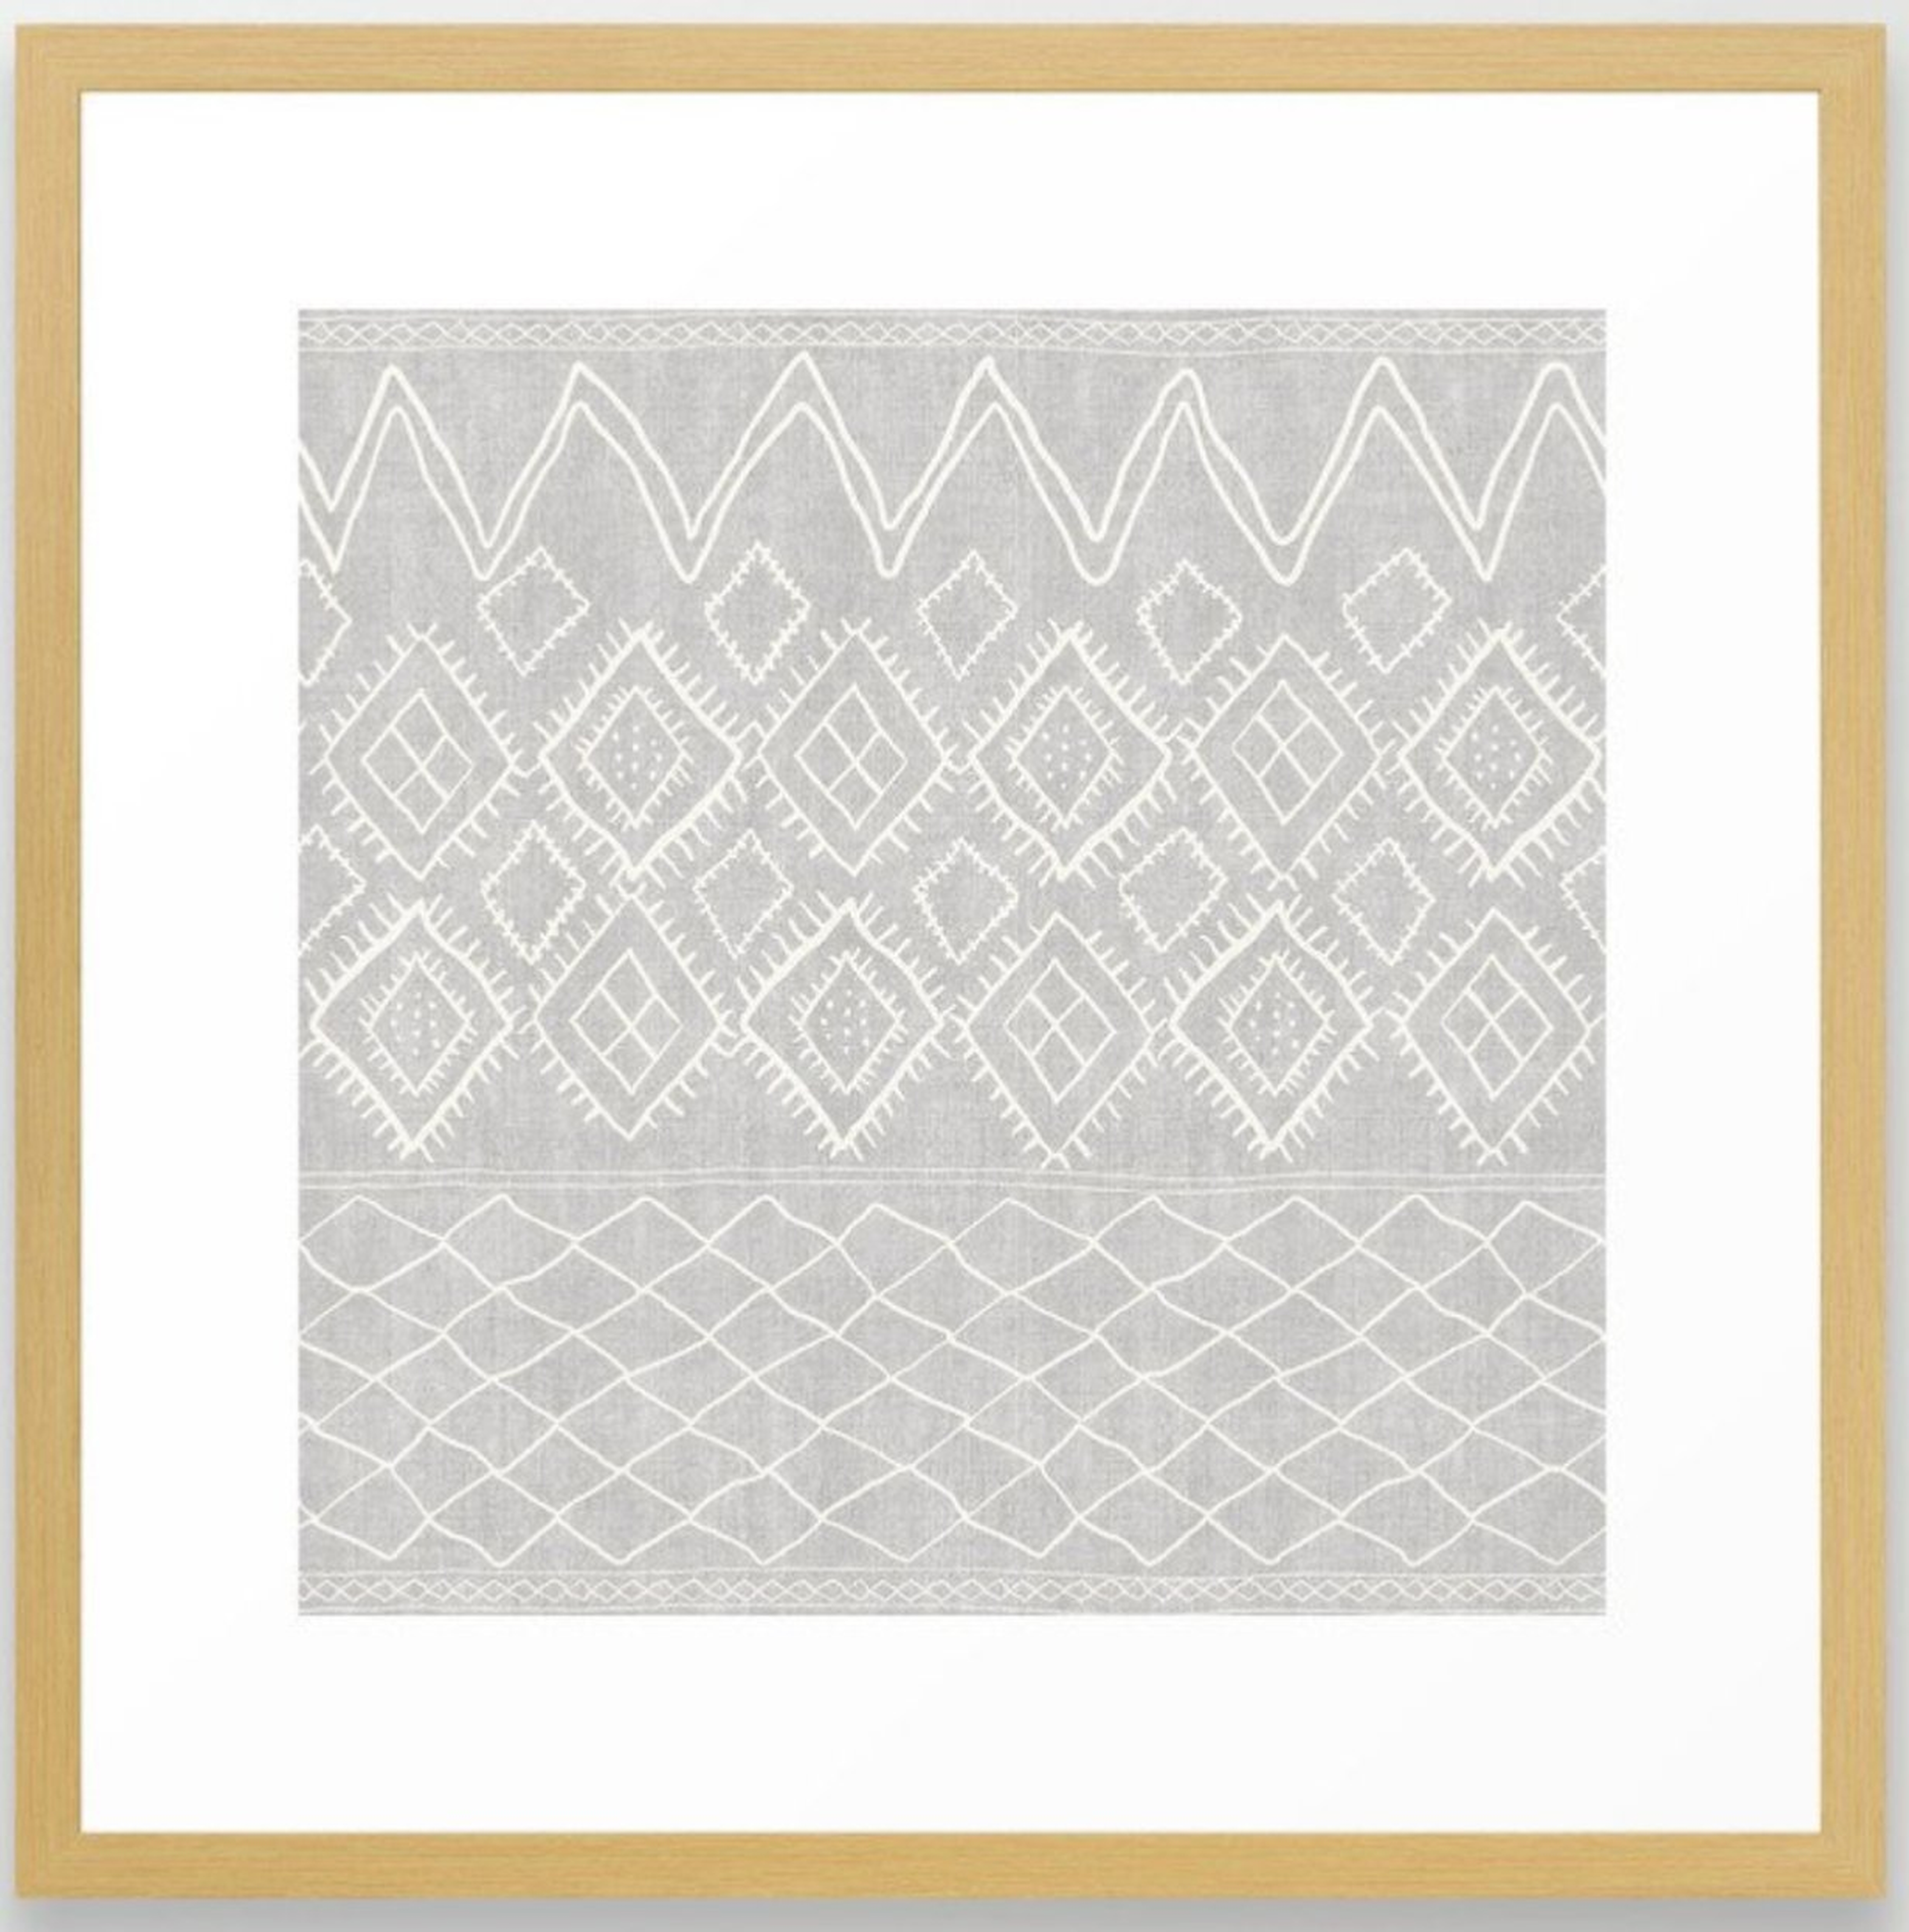 Beni Moroccan Print in Grey Framed Art Print- cpnservation natural - Society6